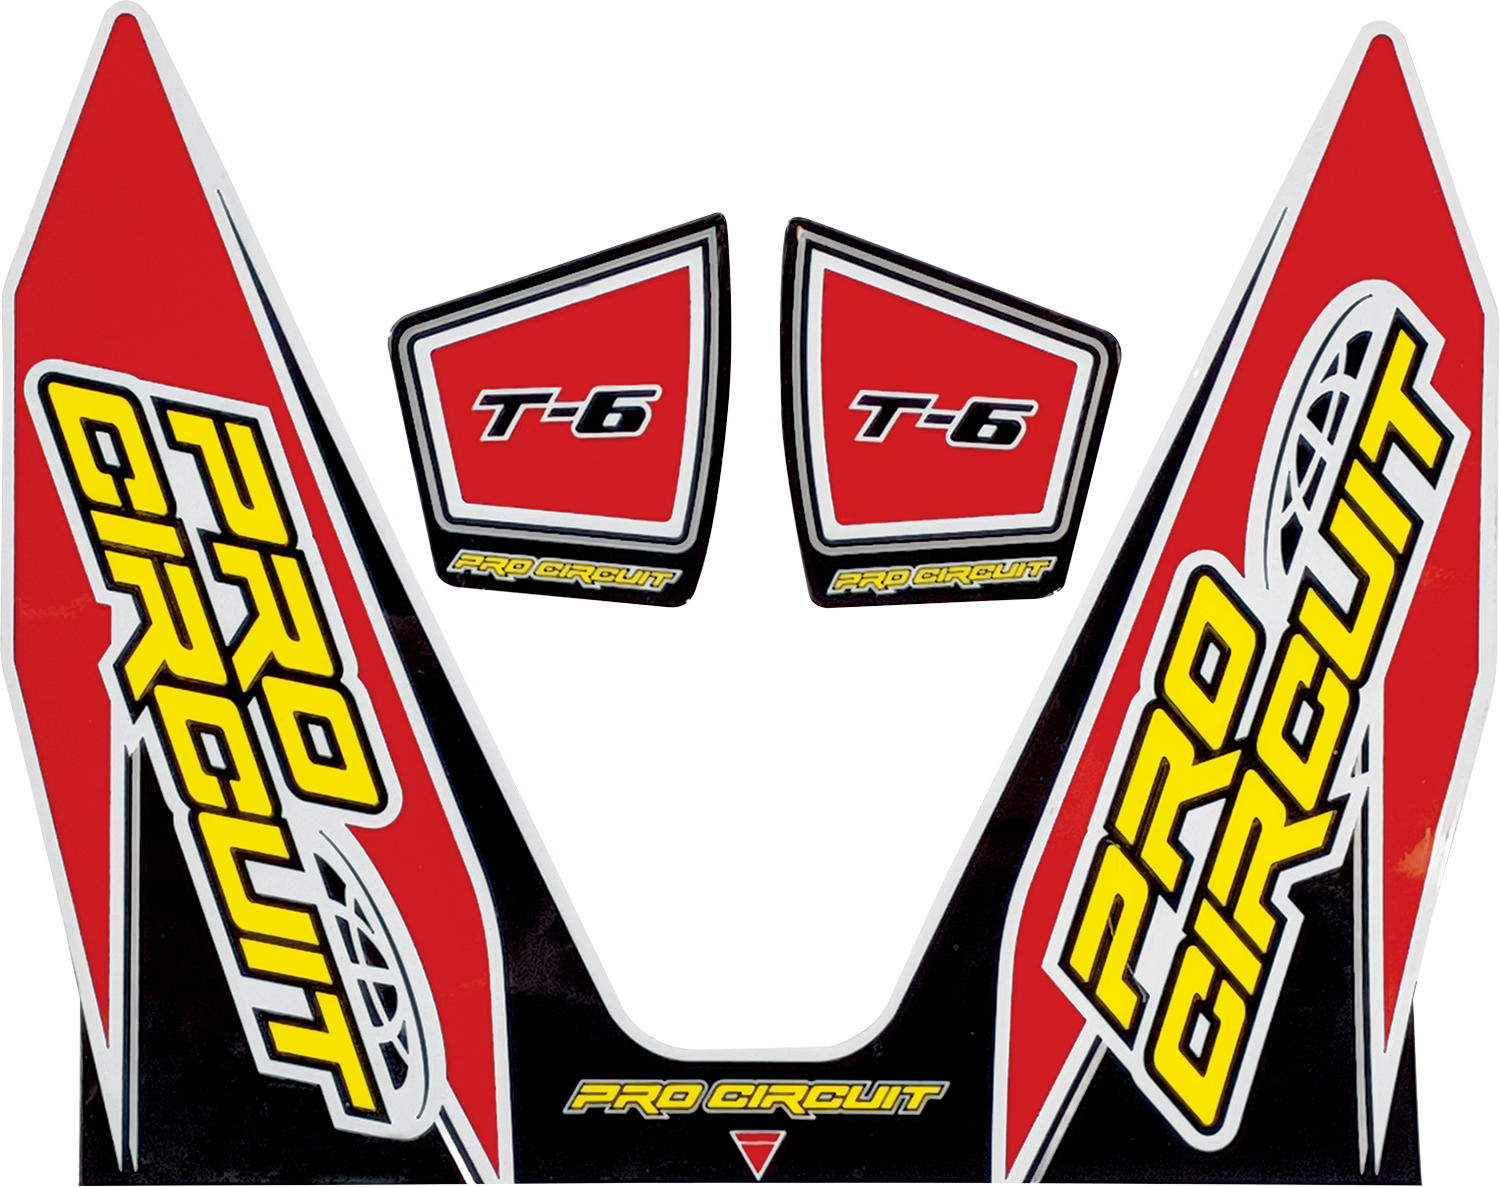 PRO CIRCUIT T-6 Decal - Red DC22T6-RED